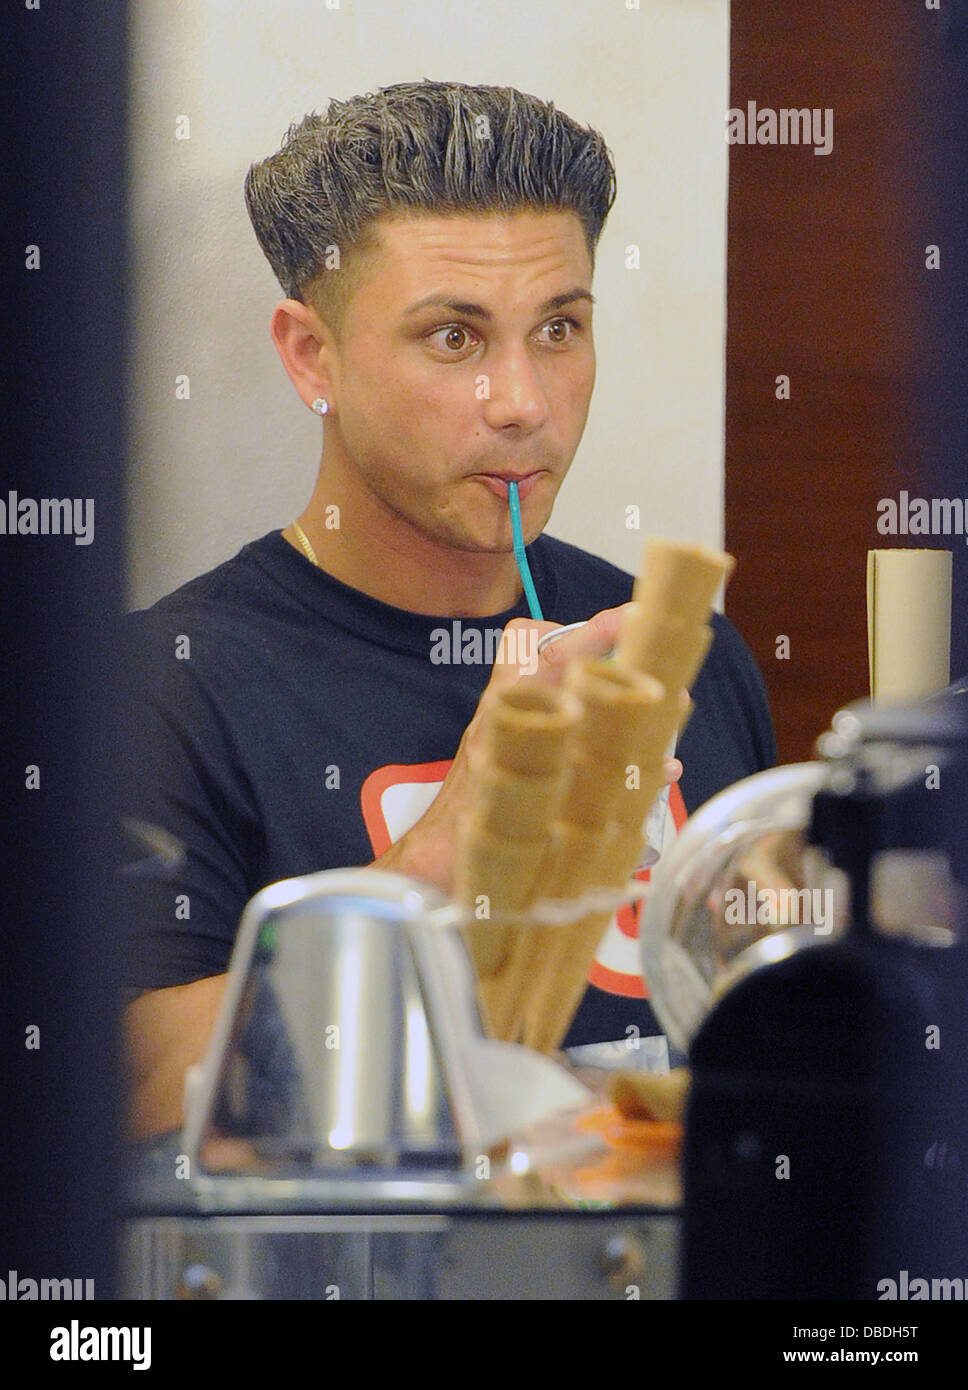 Paul "Pauly D" DelVecchio Visits a Gelato shop for some icecream, before  walking back to the Jersey Shore house. Florence, Italy - 24.05.11 Stock  Photo - Alamy